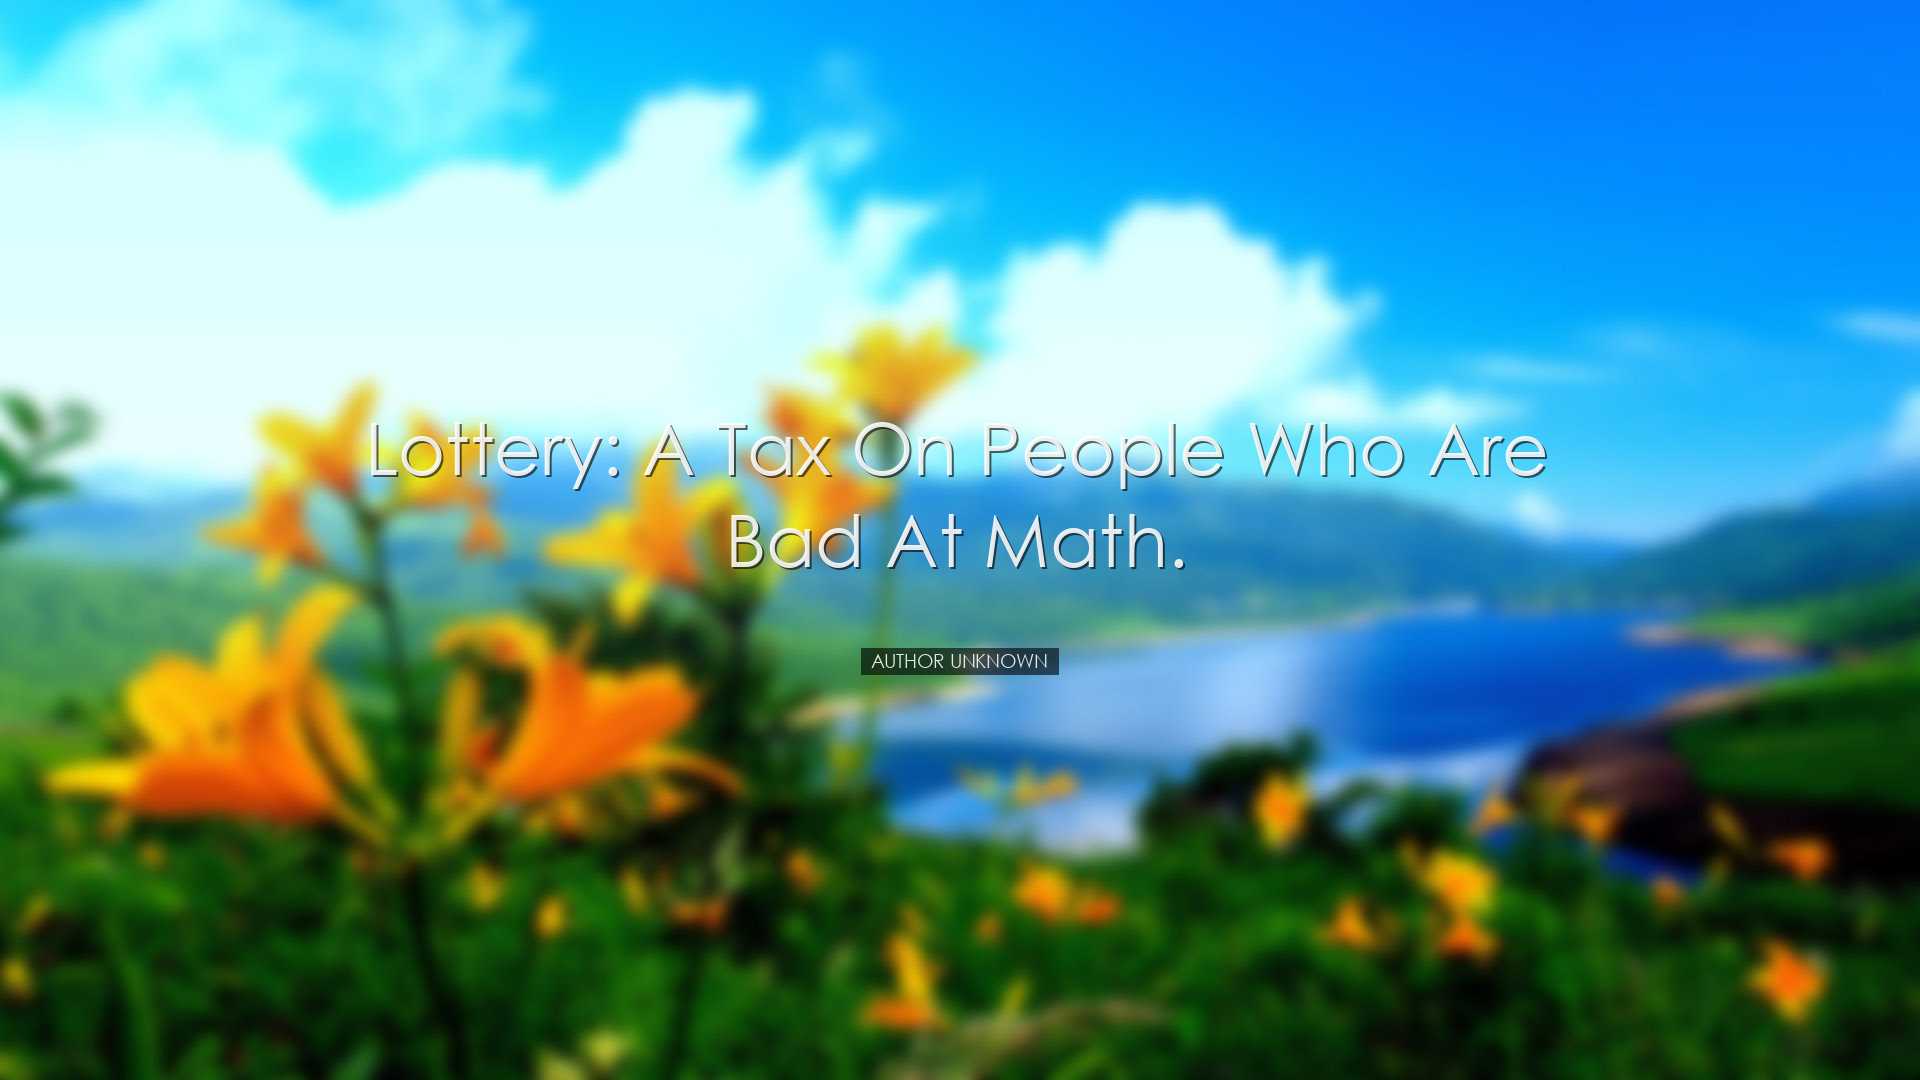 Lottery: A tax on people who are bad at math. - Author Unknown